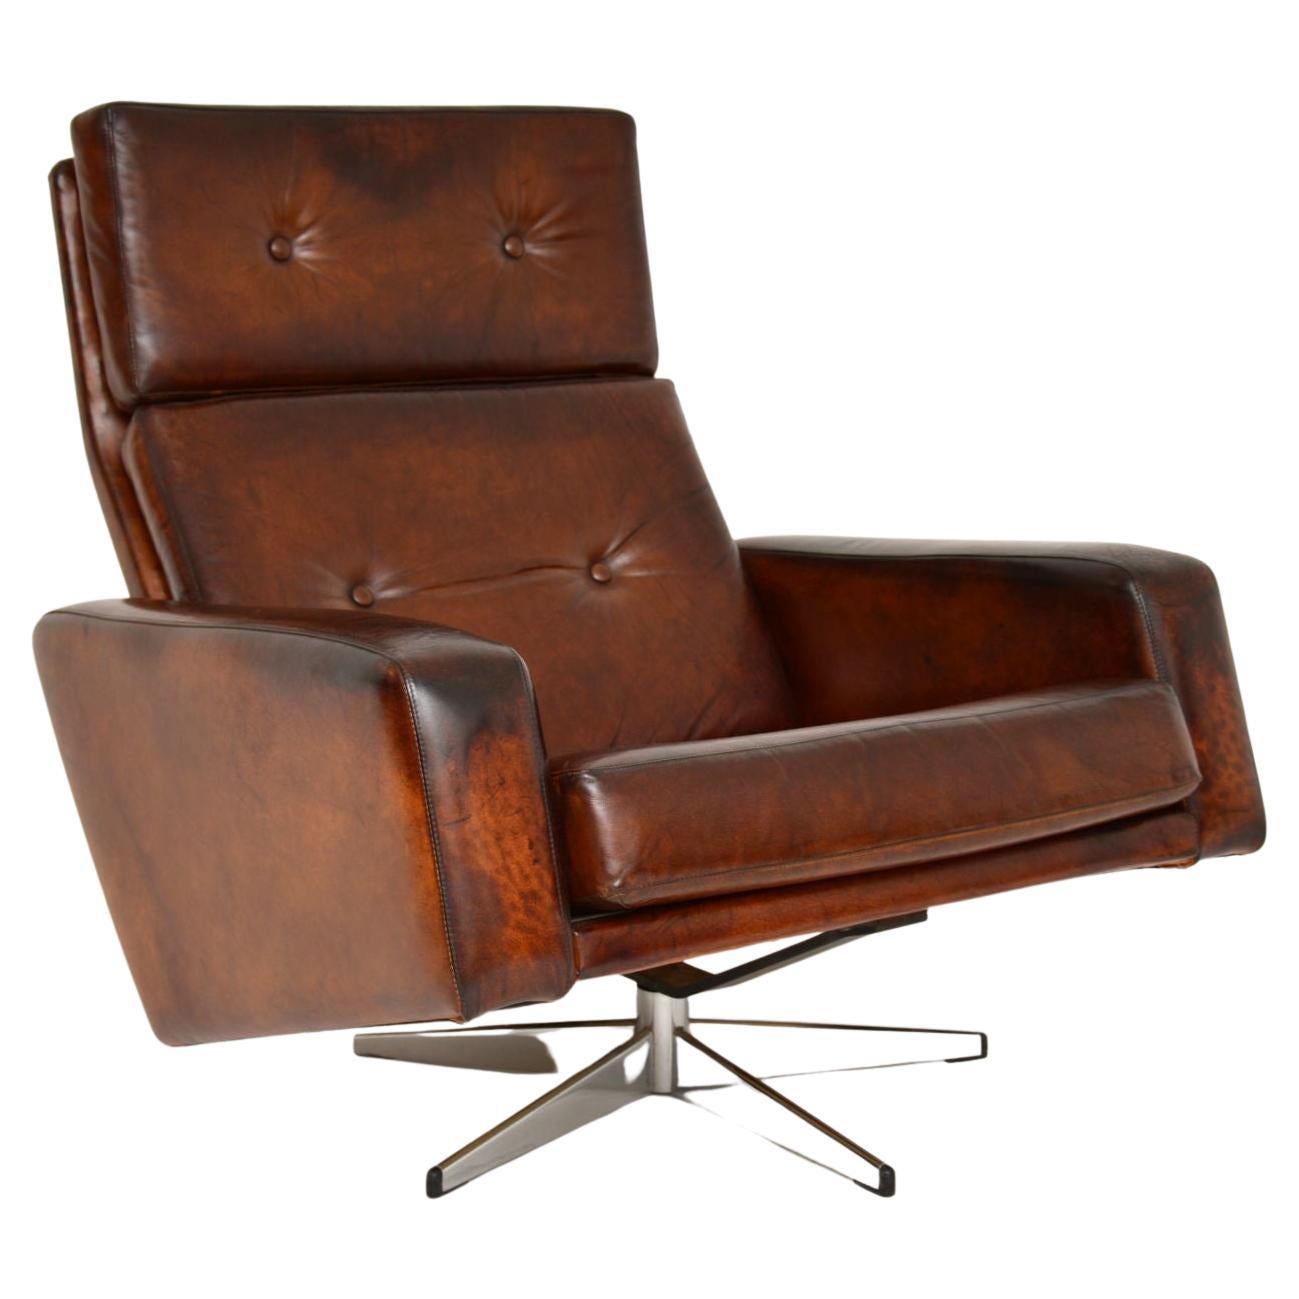 1960's Vintage Leather Swivel 'Leo' Chair by Robin Day for Hille